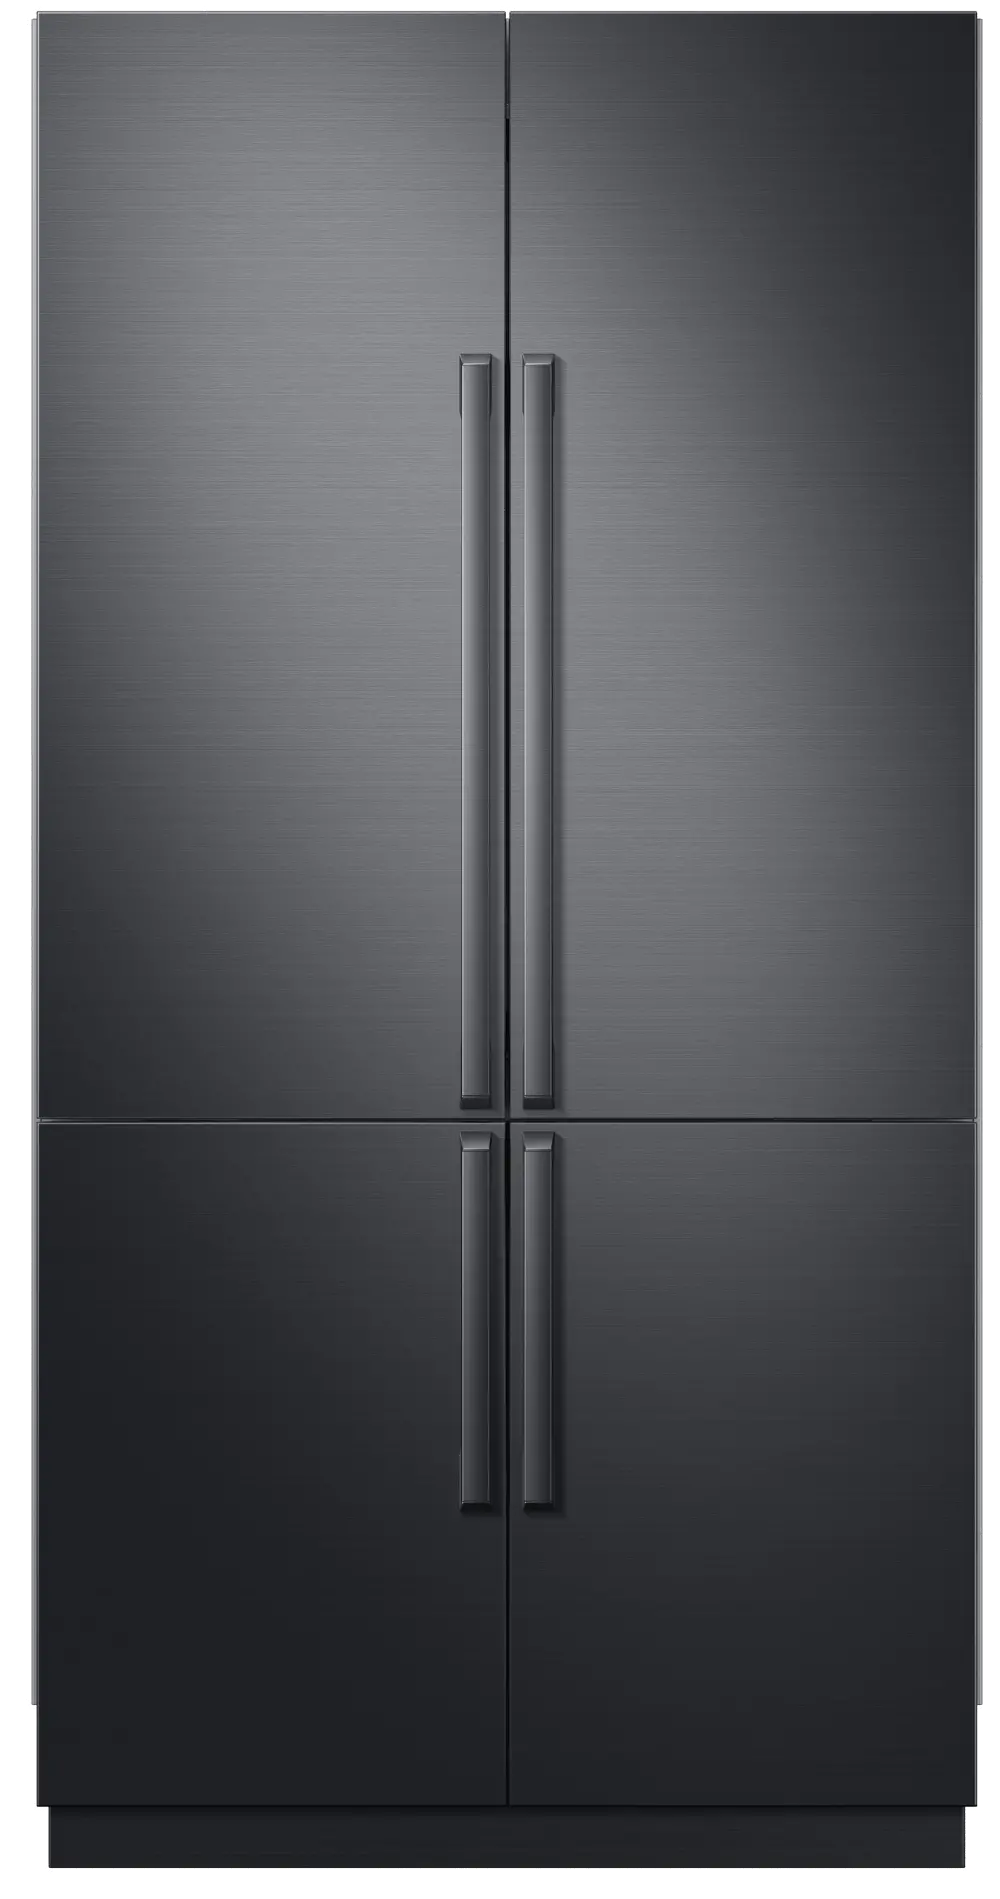 RAT42ACAAMS Samsung Chef Accessory Kit for 42 Inch Built In Refrigerator - Black Stainless Steel-1